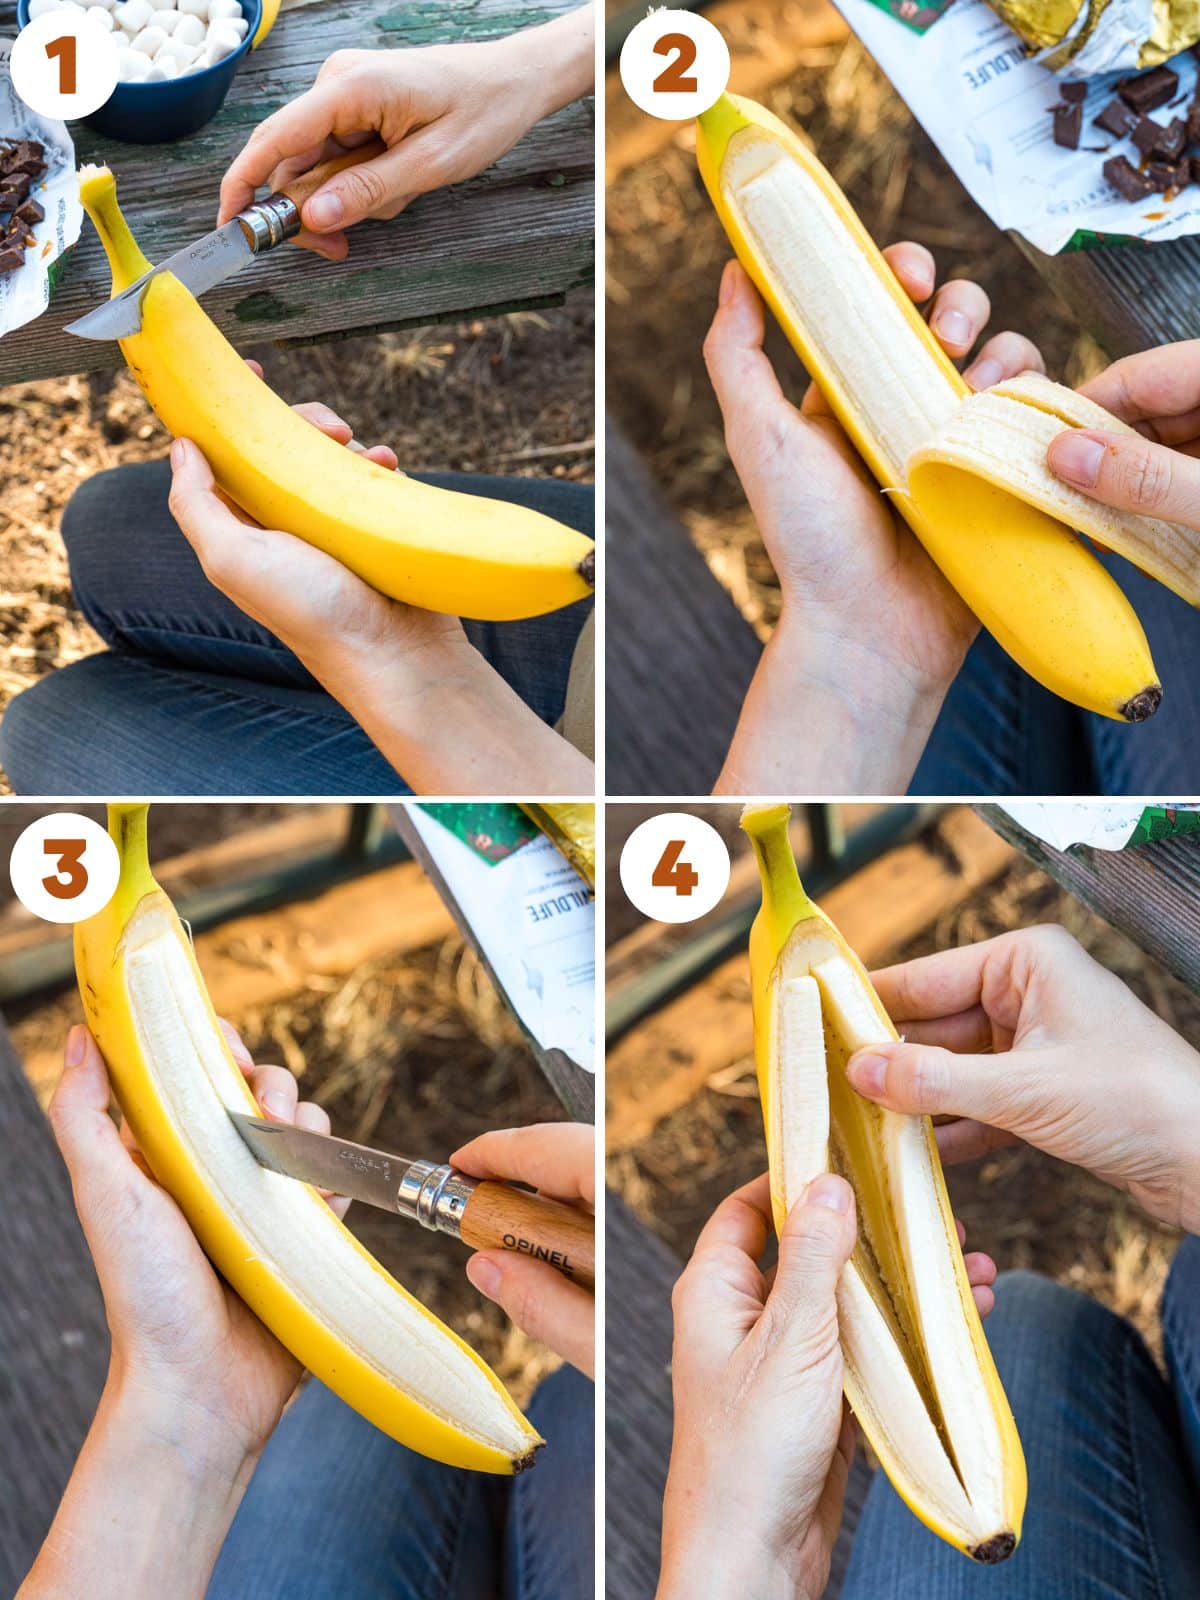 Cutting a banana down the middle